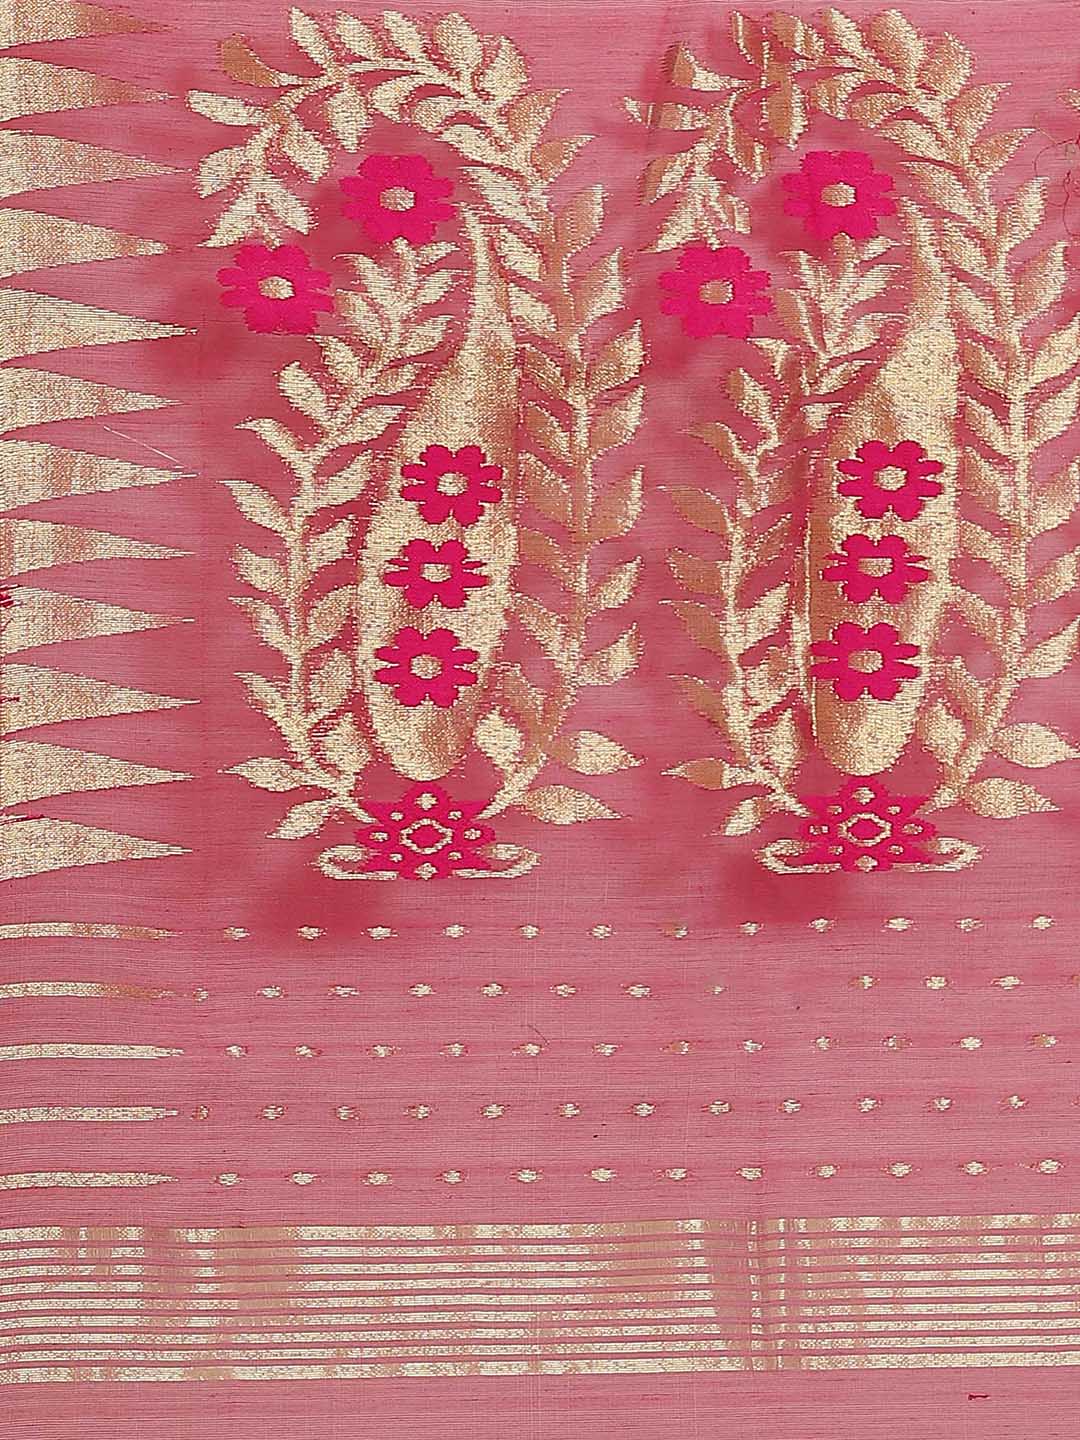 Pink and Tan, Kalakari India Jamdani Silk Cotton Woven Design Saree without blouse CHBHSA0029-Saree-Kalakari India-CHBHSA0029-Bengal, Geographical Indication, Hand Crafted, Hand Painted, Heritage Prints, Jamdani, Natural Dyes, Red, Sarees, Silk Blended, Sustainable Fabrics, Woven, Yellow-[Linen,Ethnic,wear,Fashionista,Handloom,Handicraft,Indigo,blockprint,block,print,Cotton,Chanderi,Blue, latest,classy,party,bollywood,trendy,summer,style,traditional,formal,elegant,unique,style,hand,block,print, 